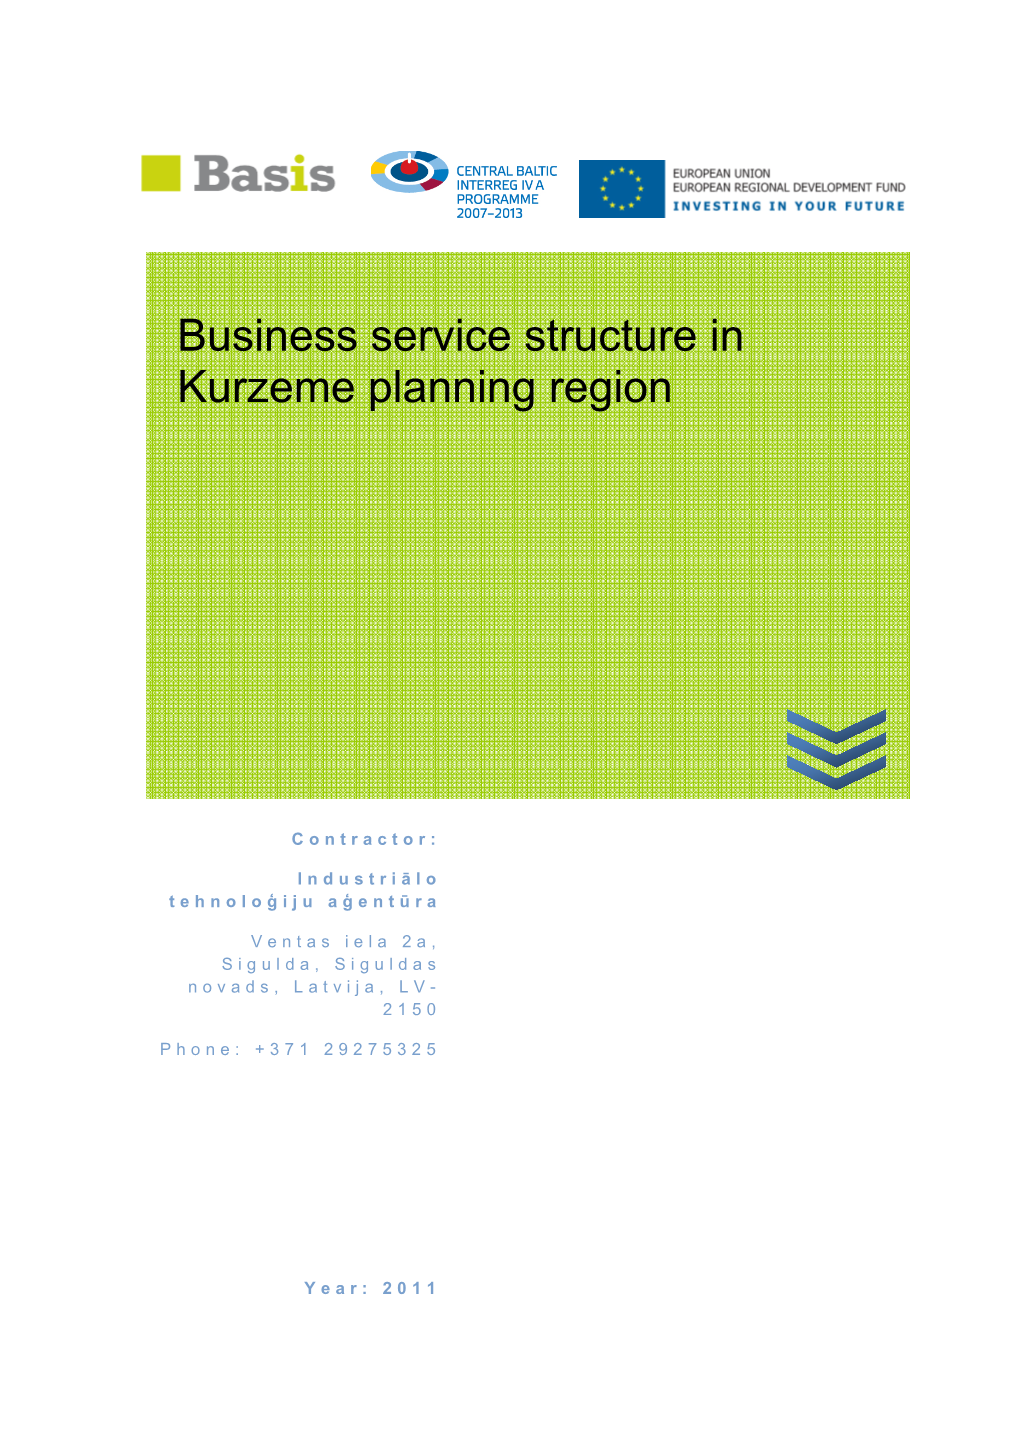 Research on Business Service Structure in Kurzeme Region